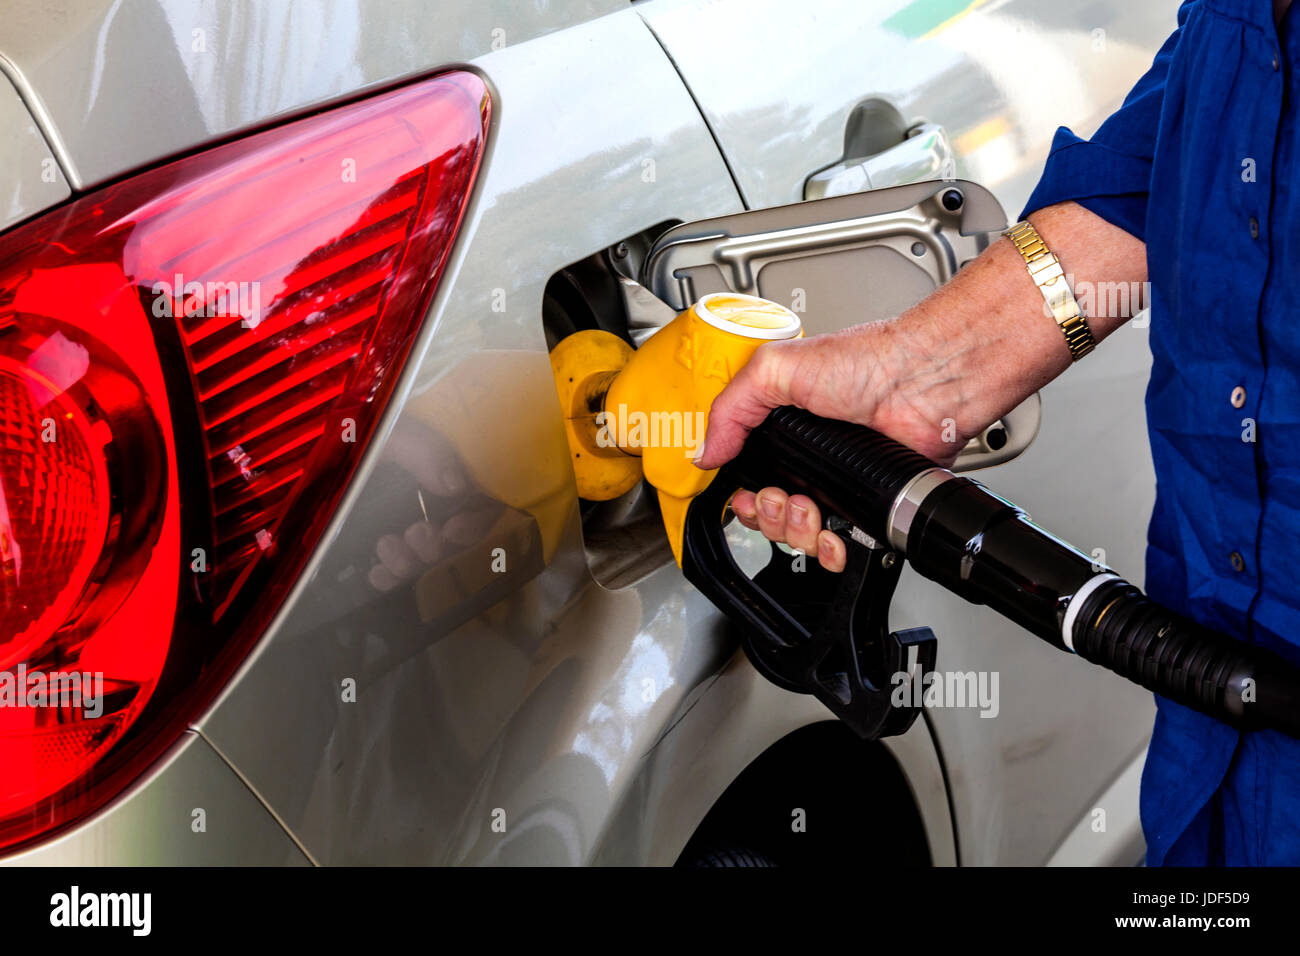 Women filling her car with petrol at service station Stock Photo